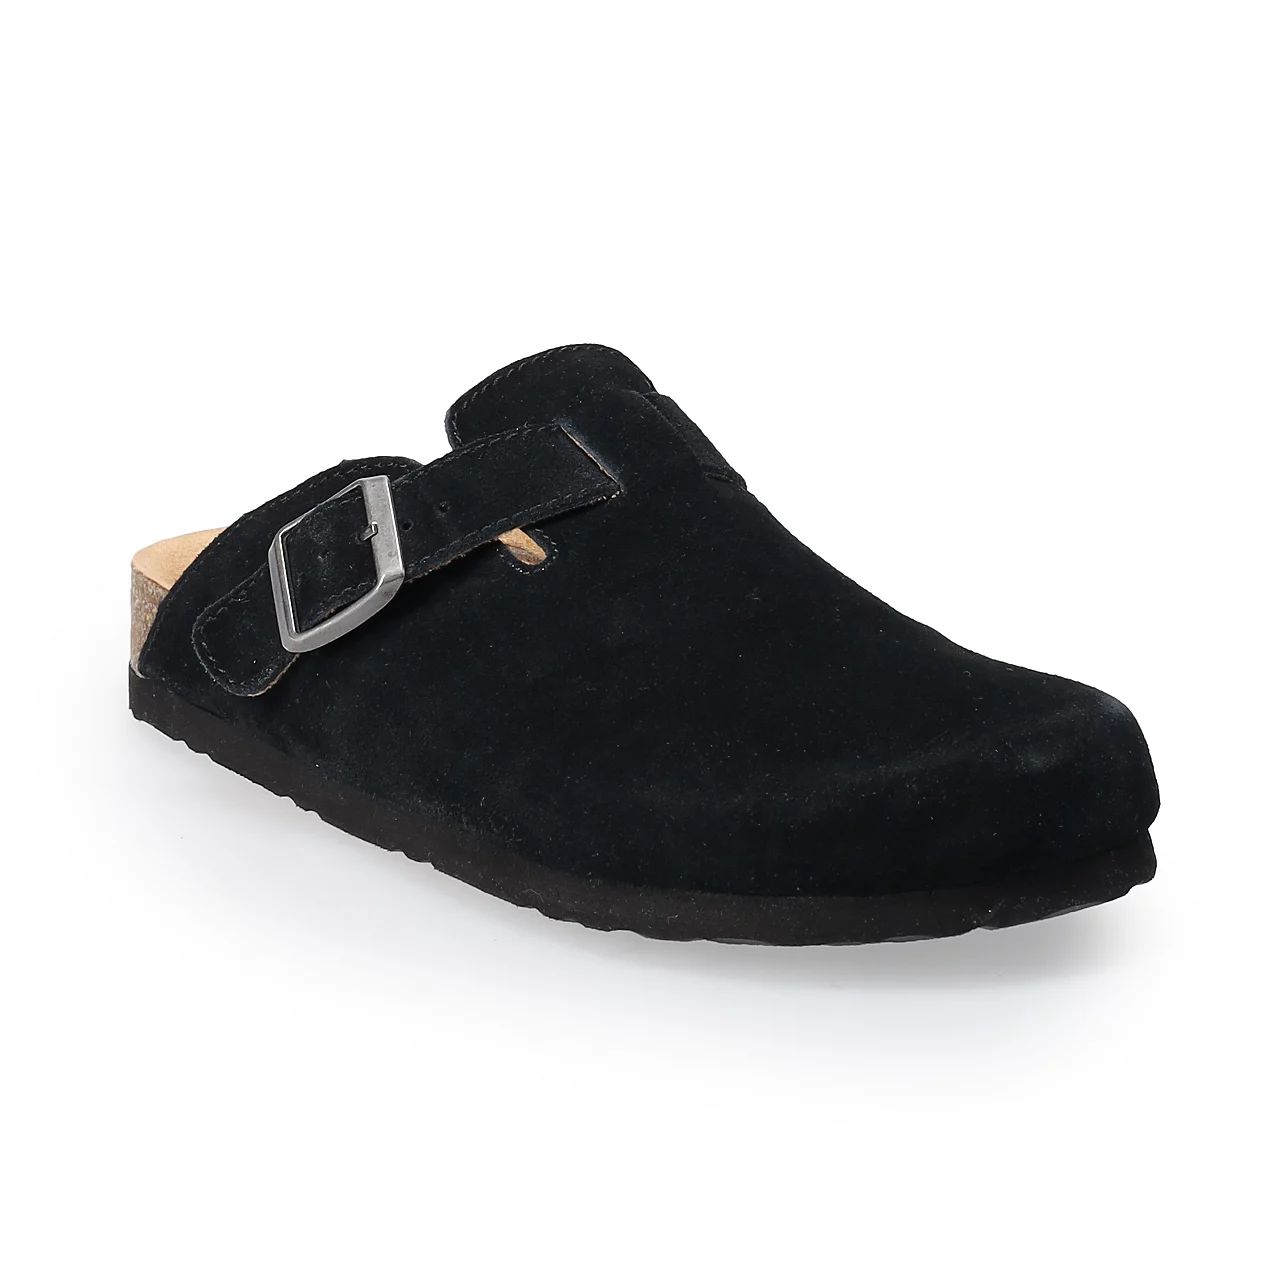 Sonoma Goods For Life® Waterford Women's Suede Clogs | Kohl's